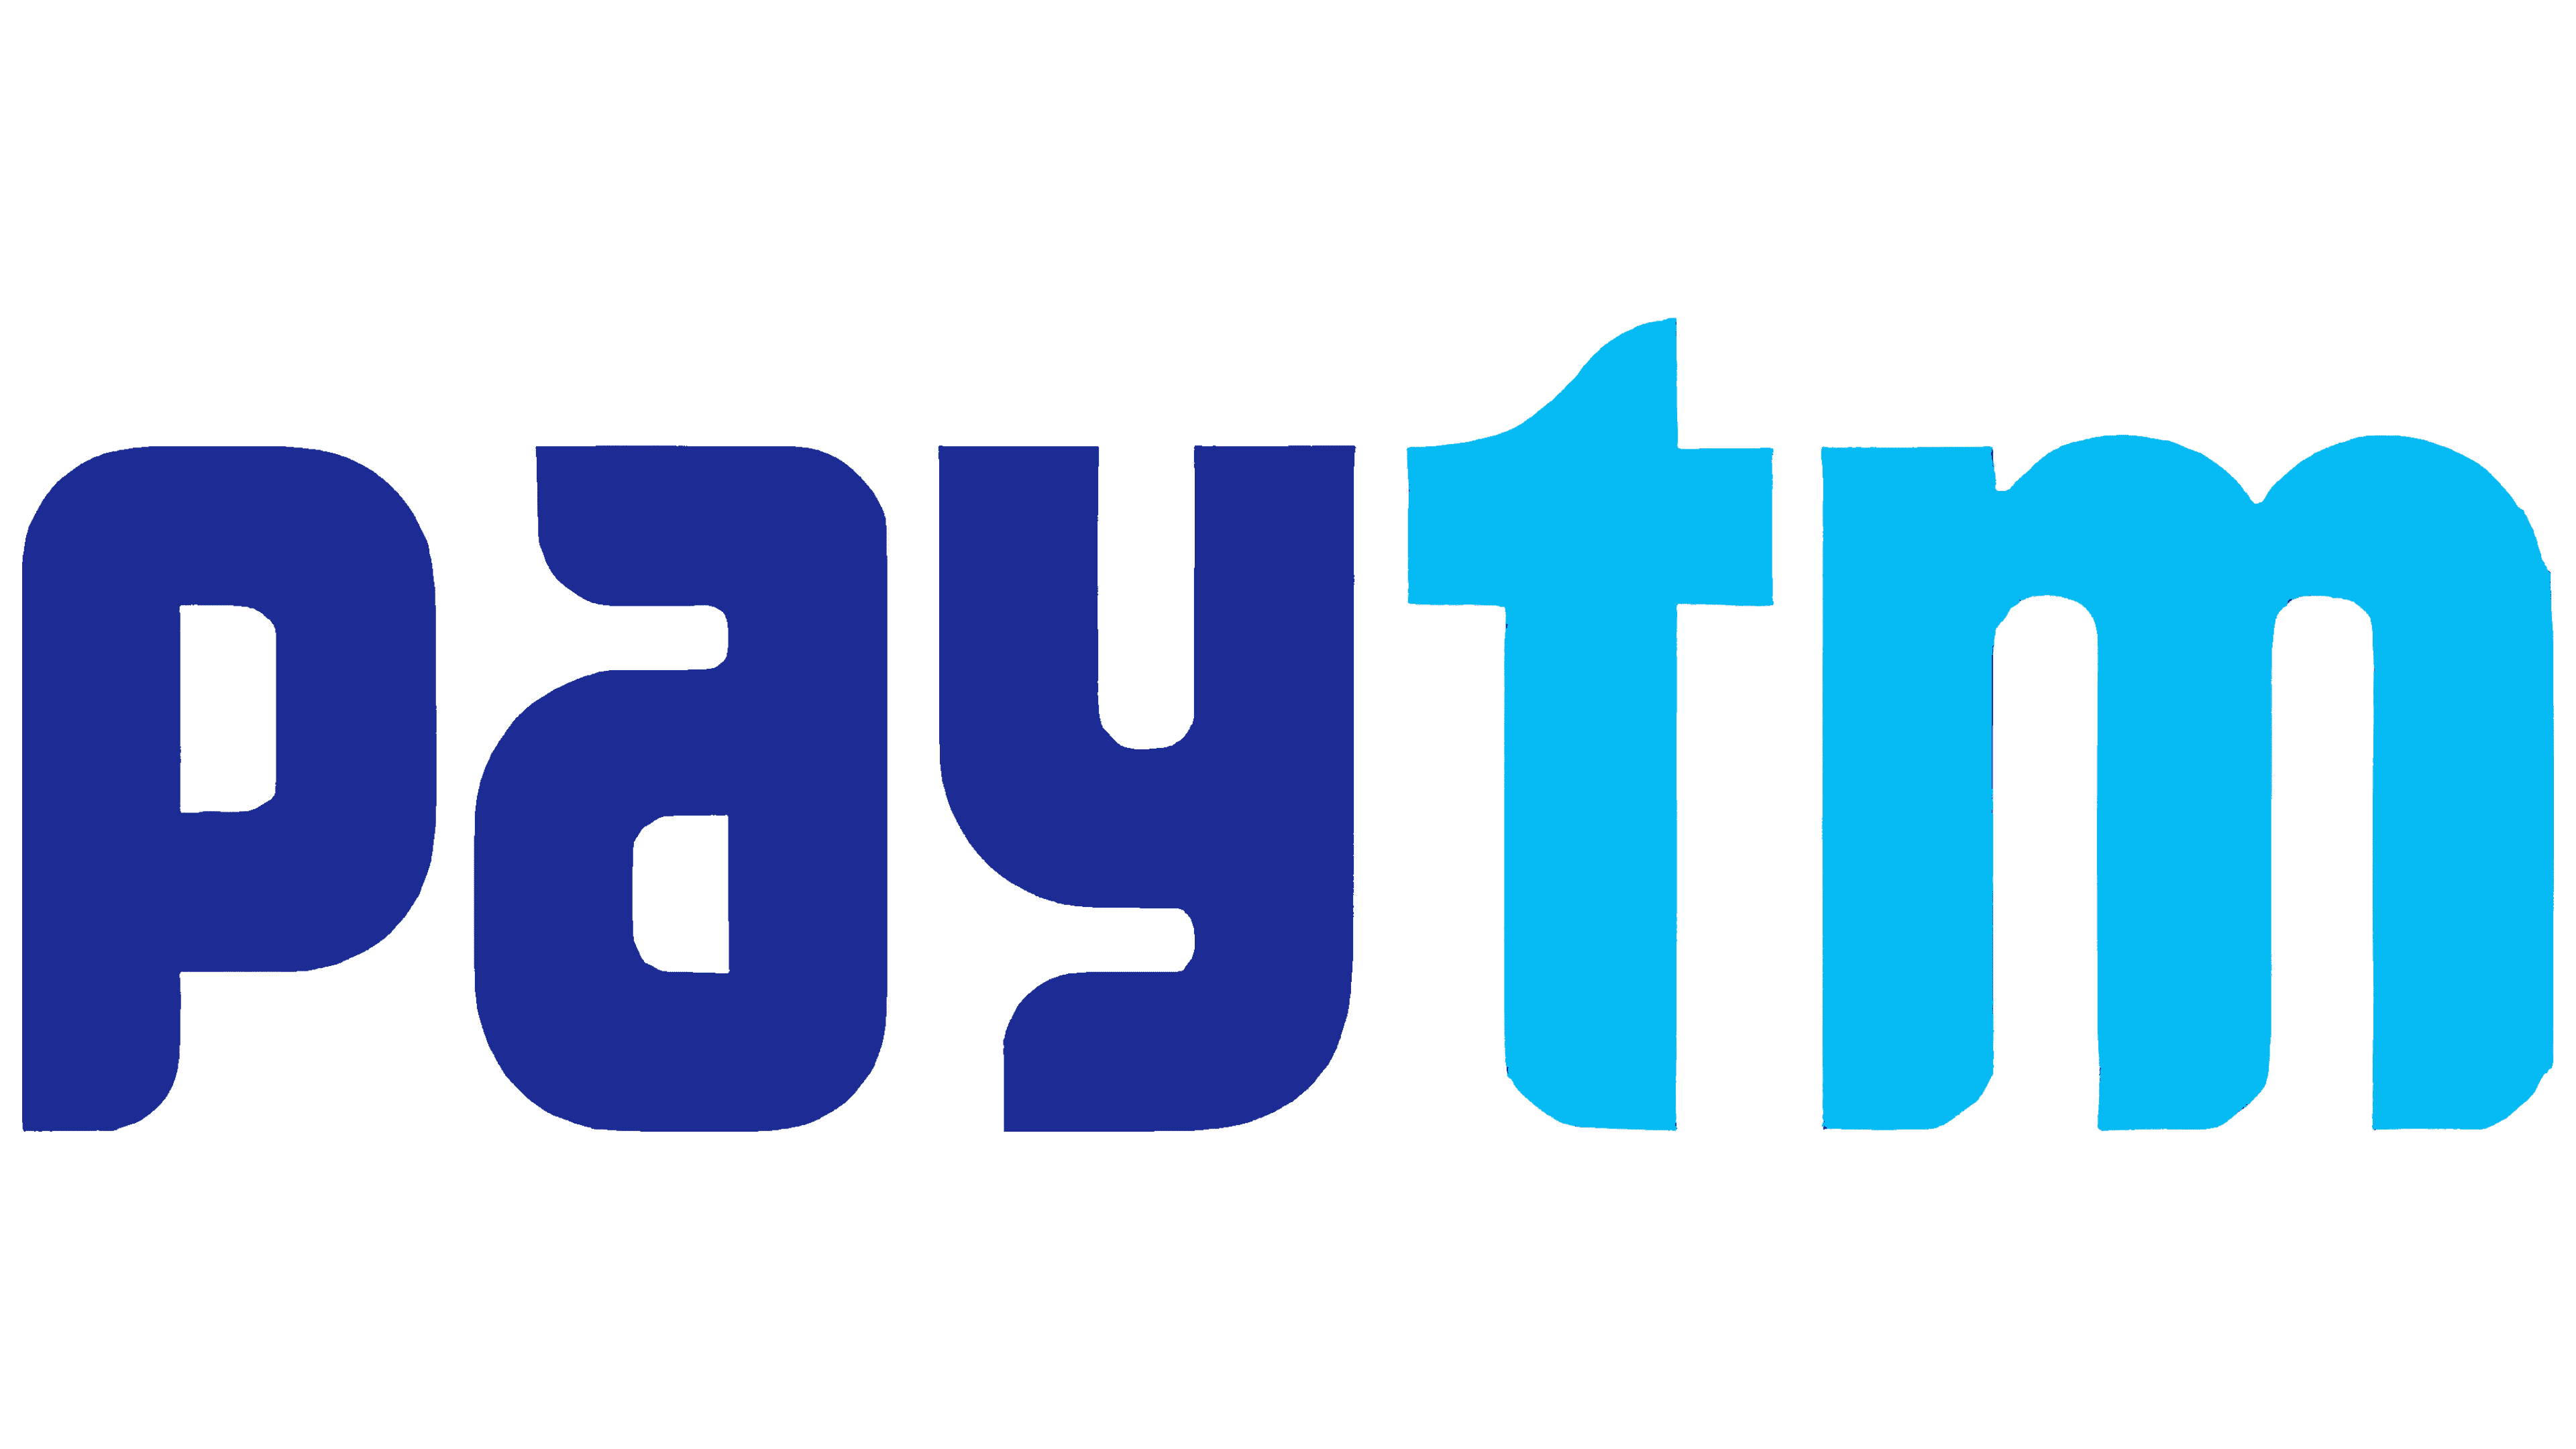 Paytm Reports Impressive Growth Surge in Users, Merchant Subscriptions, and Payment Volumes